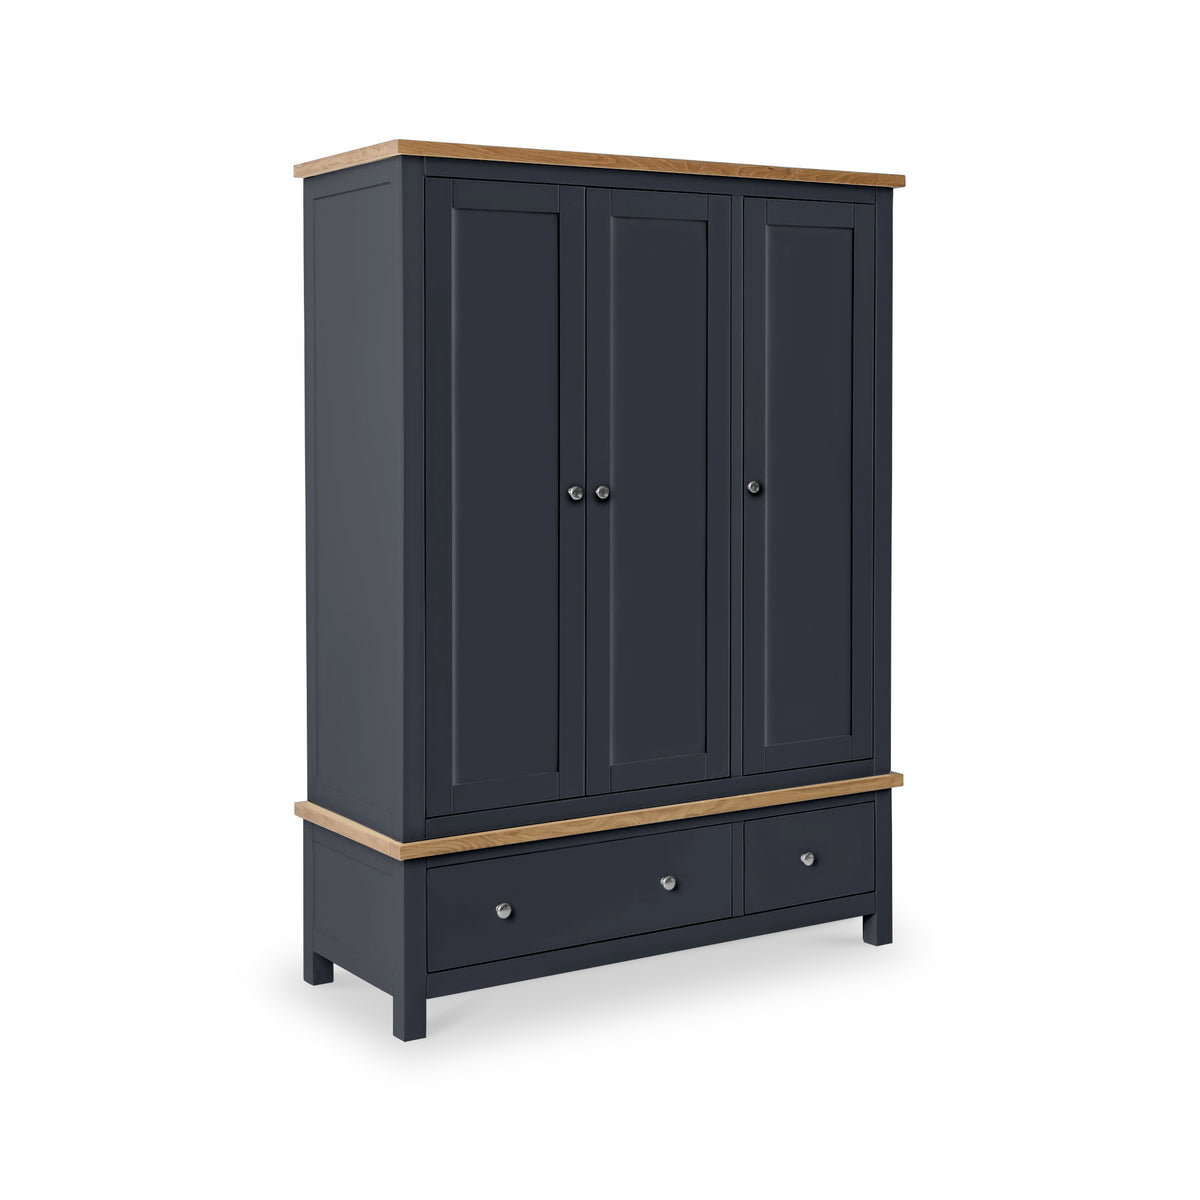 Farrow Charcoal Triple Wardrobe with Storage Drawers from Roseland Furniture